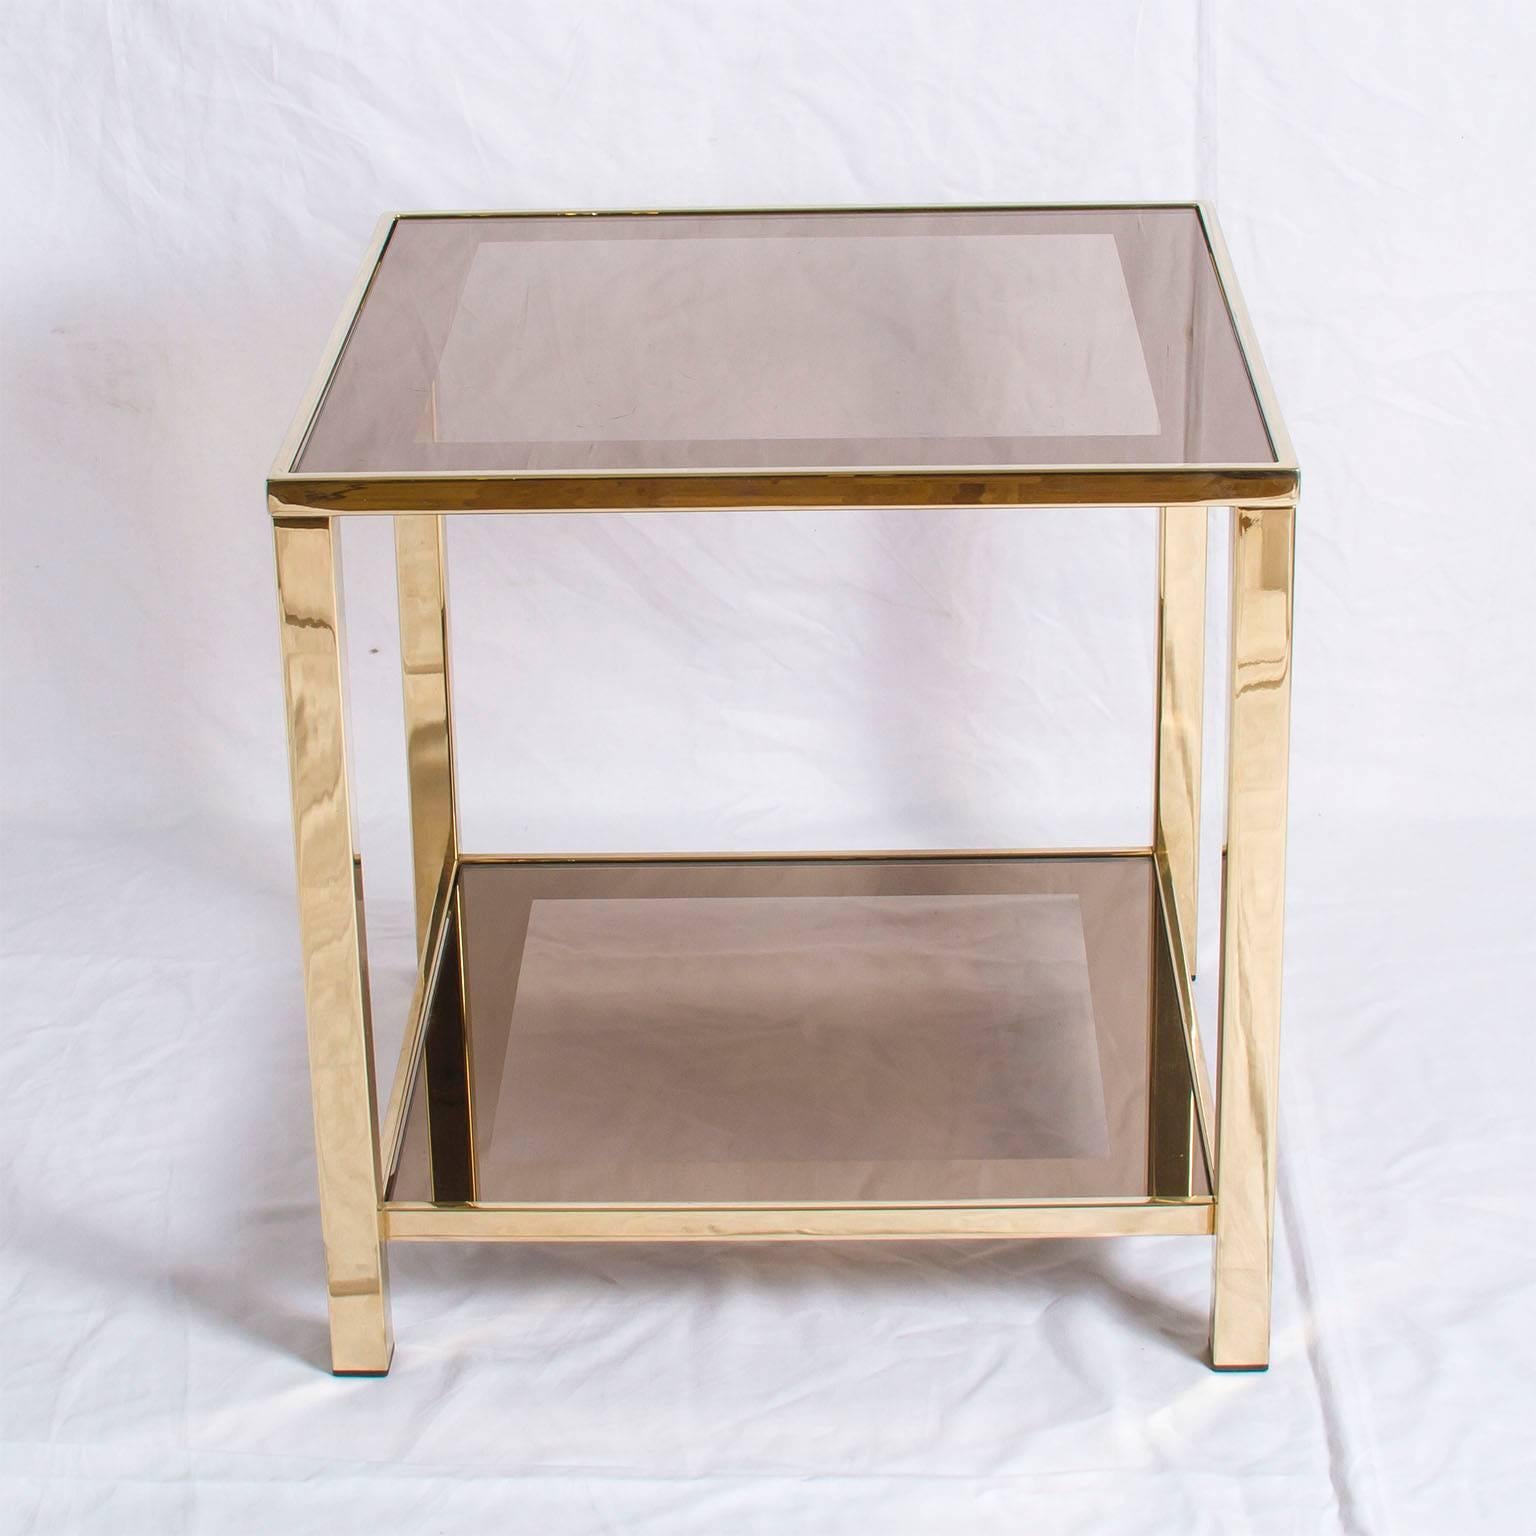 Pair of Two 23-Carat Gold-Plated Side Tables by Belgo Chrome In Excellent Condition In Brussels, Brussels